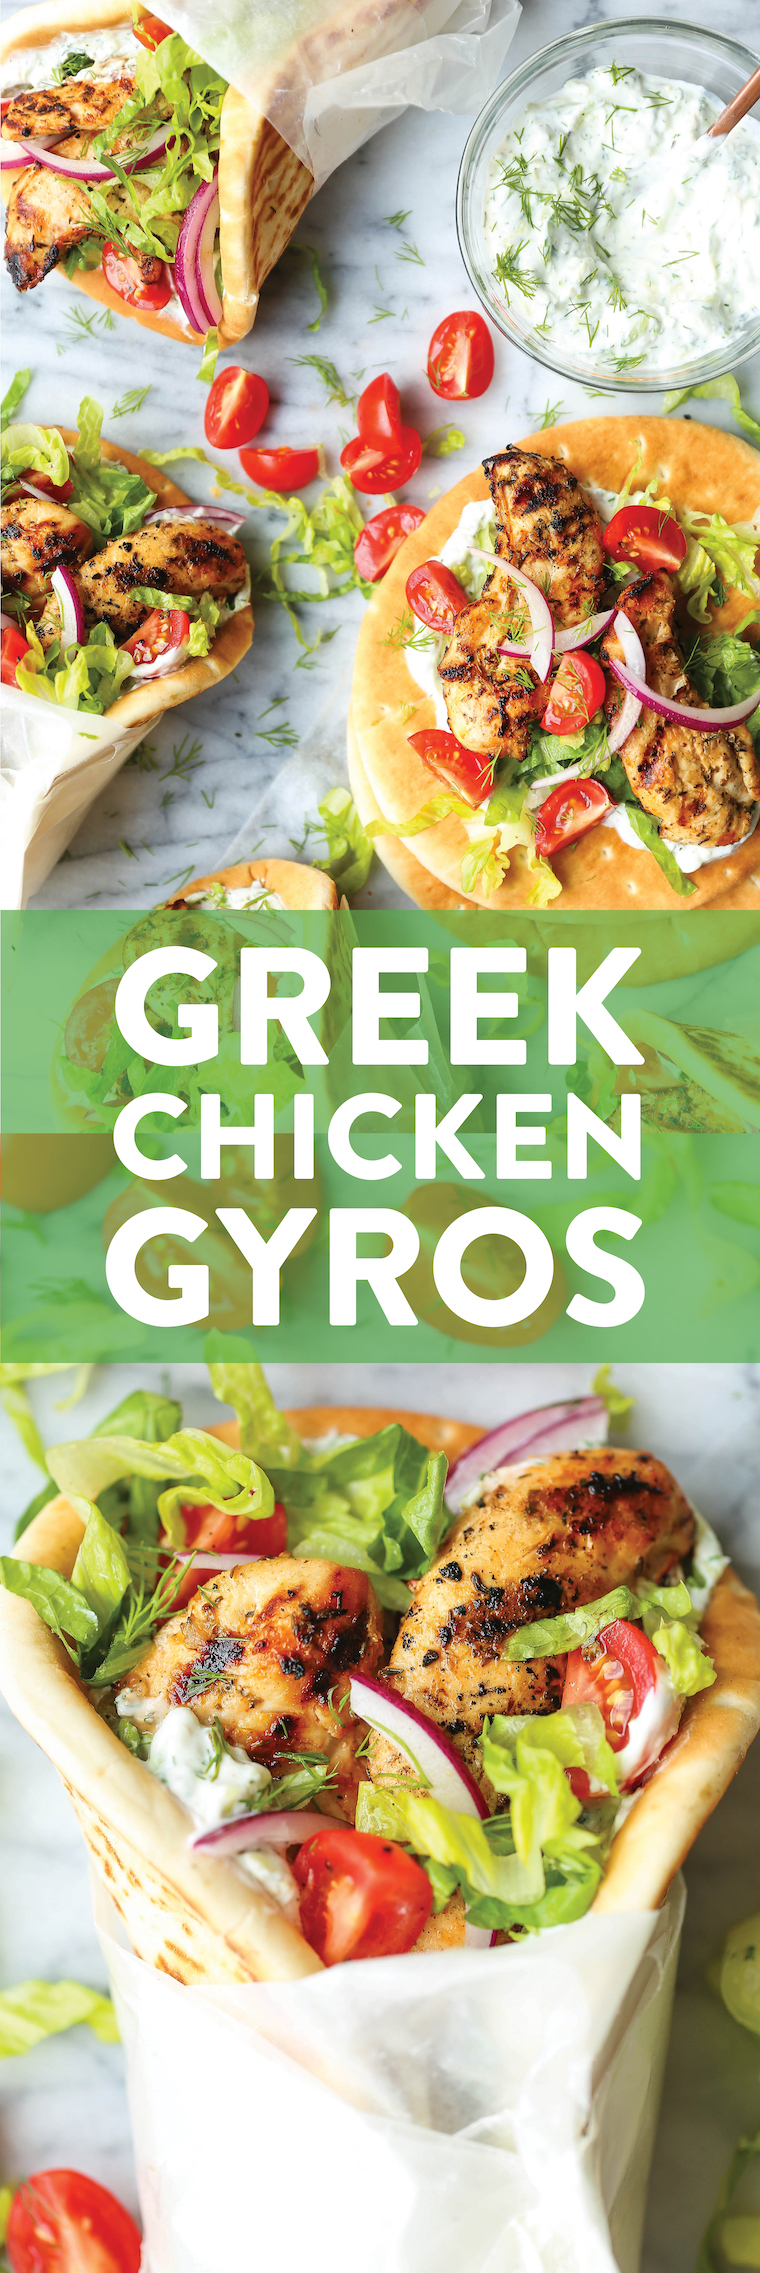 Greek Chicken Gyros - Easy, make-ahead chicken gyros! You can marinate the chicken ahead of time and whip up your homemade tzatziki too! So fast, so good!